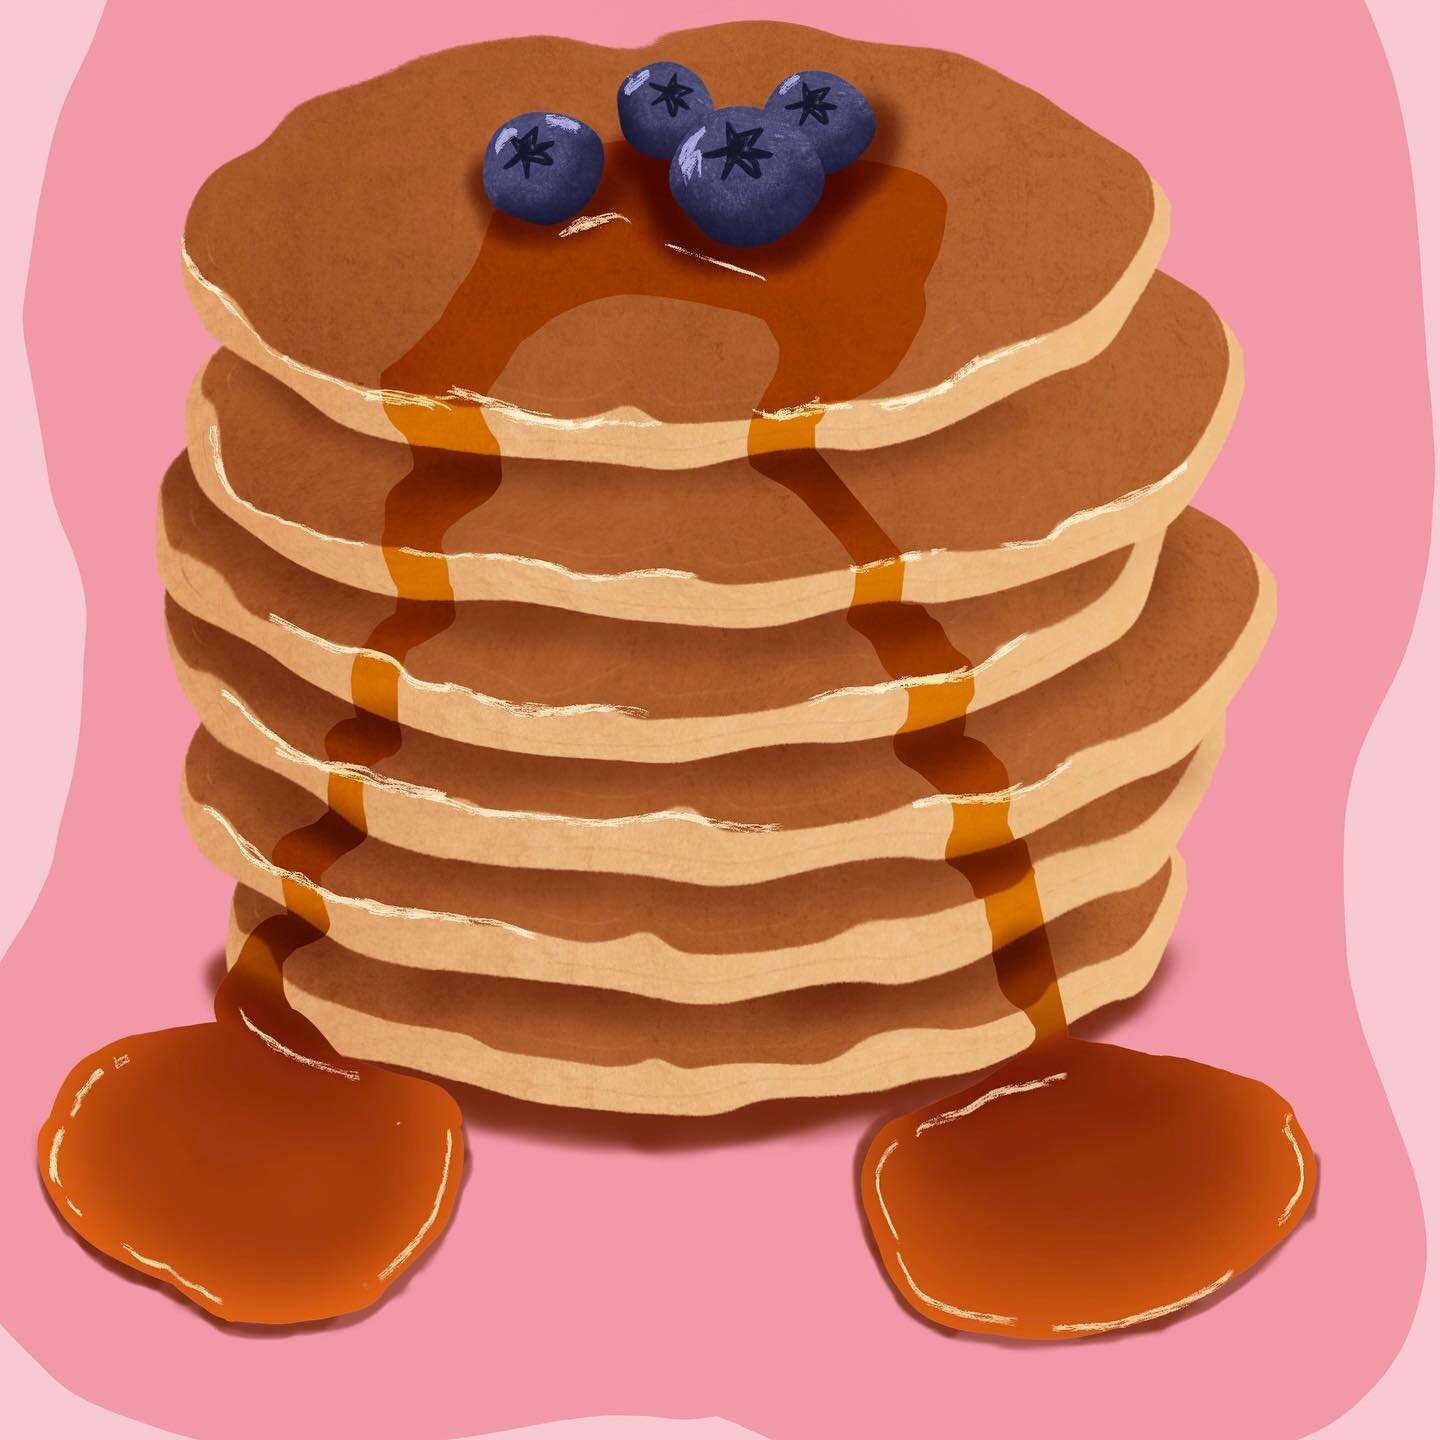 Digital art dreams becoming a reality. Learning procreate and made these yummy pancakes from a tutorial by @floortjesart #learningprocreatejourney #procreateart